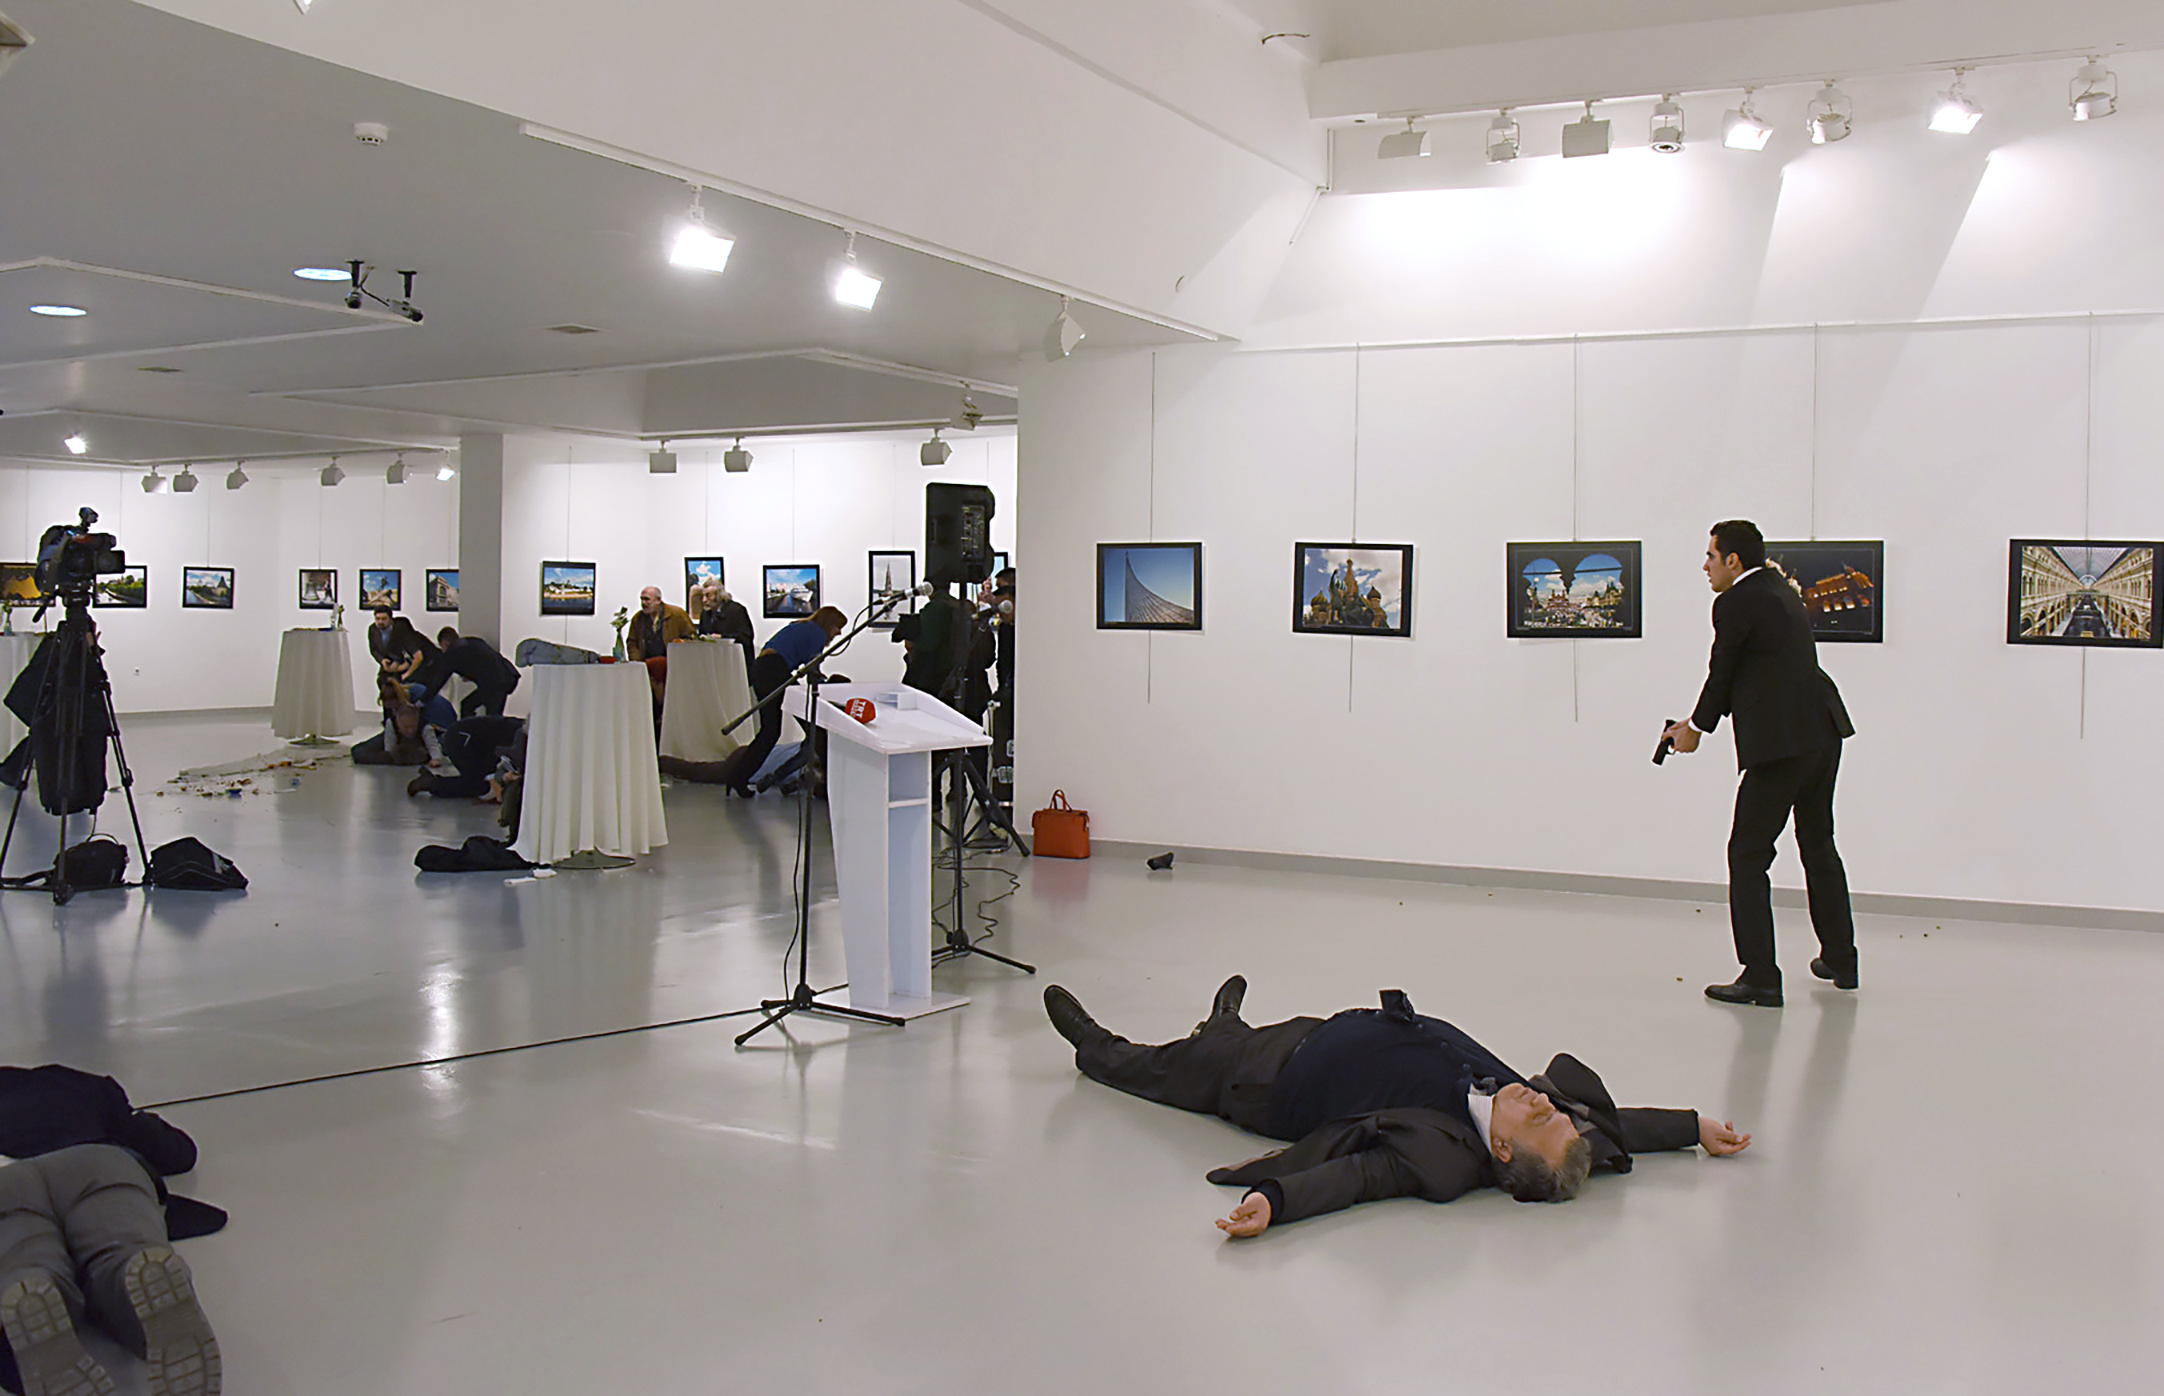 Andrey Karlov, Russia's ambassador to Turkey, lays on the ground after being shot by a gunman at a photo exhibit in Ankara on Dec. 19. He later died from his wounds. (Yavuz Alatan—AFP/Getty Images)